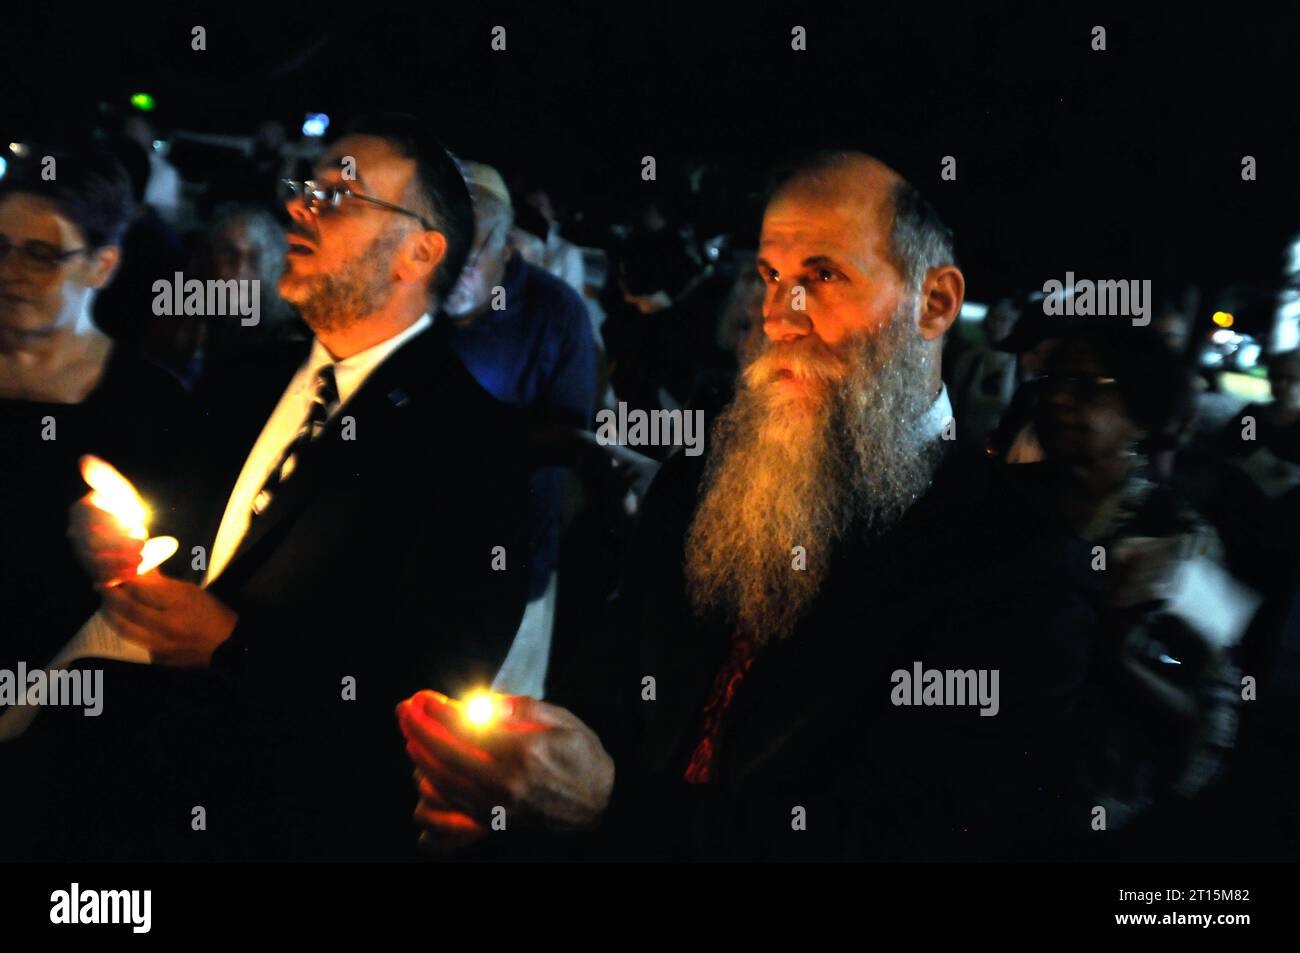 Melbourne, Brevard County, Florida, USA. October 10, 2023 Temple Beth Sholom held a 'Prayer Gathering for Israel' in an interfaith gathering this evening. Photo Credit: Julian Leek/Alamy Live News Stock Photo